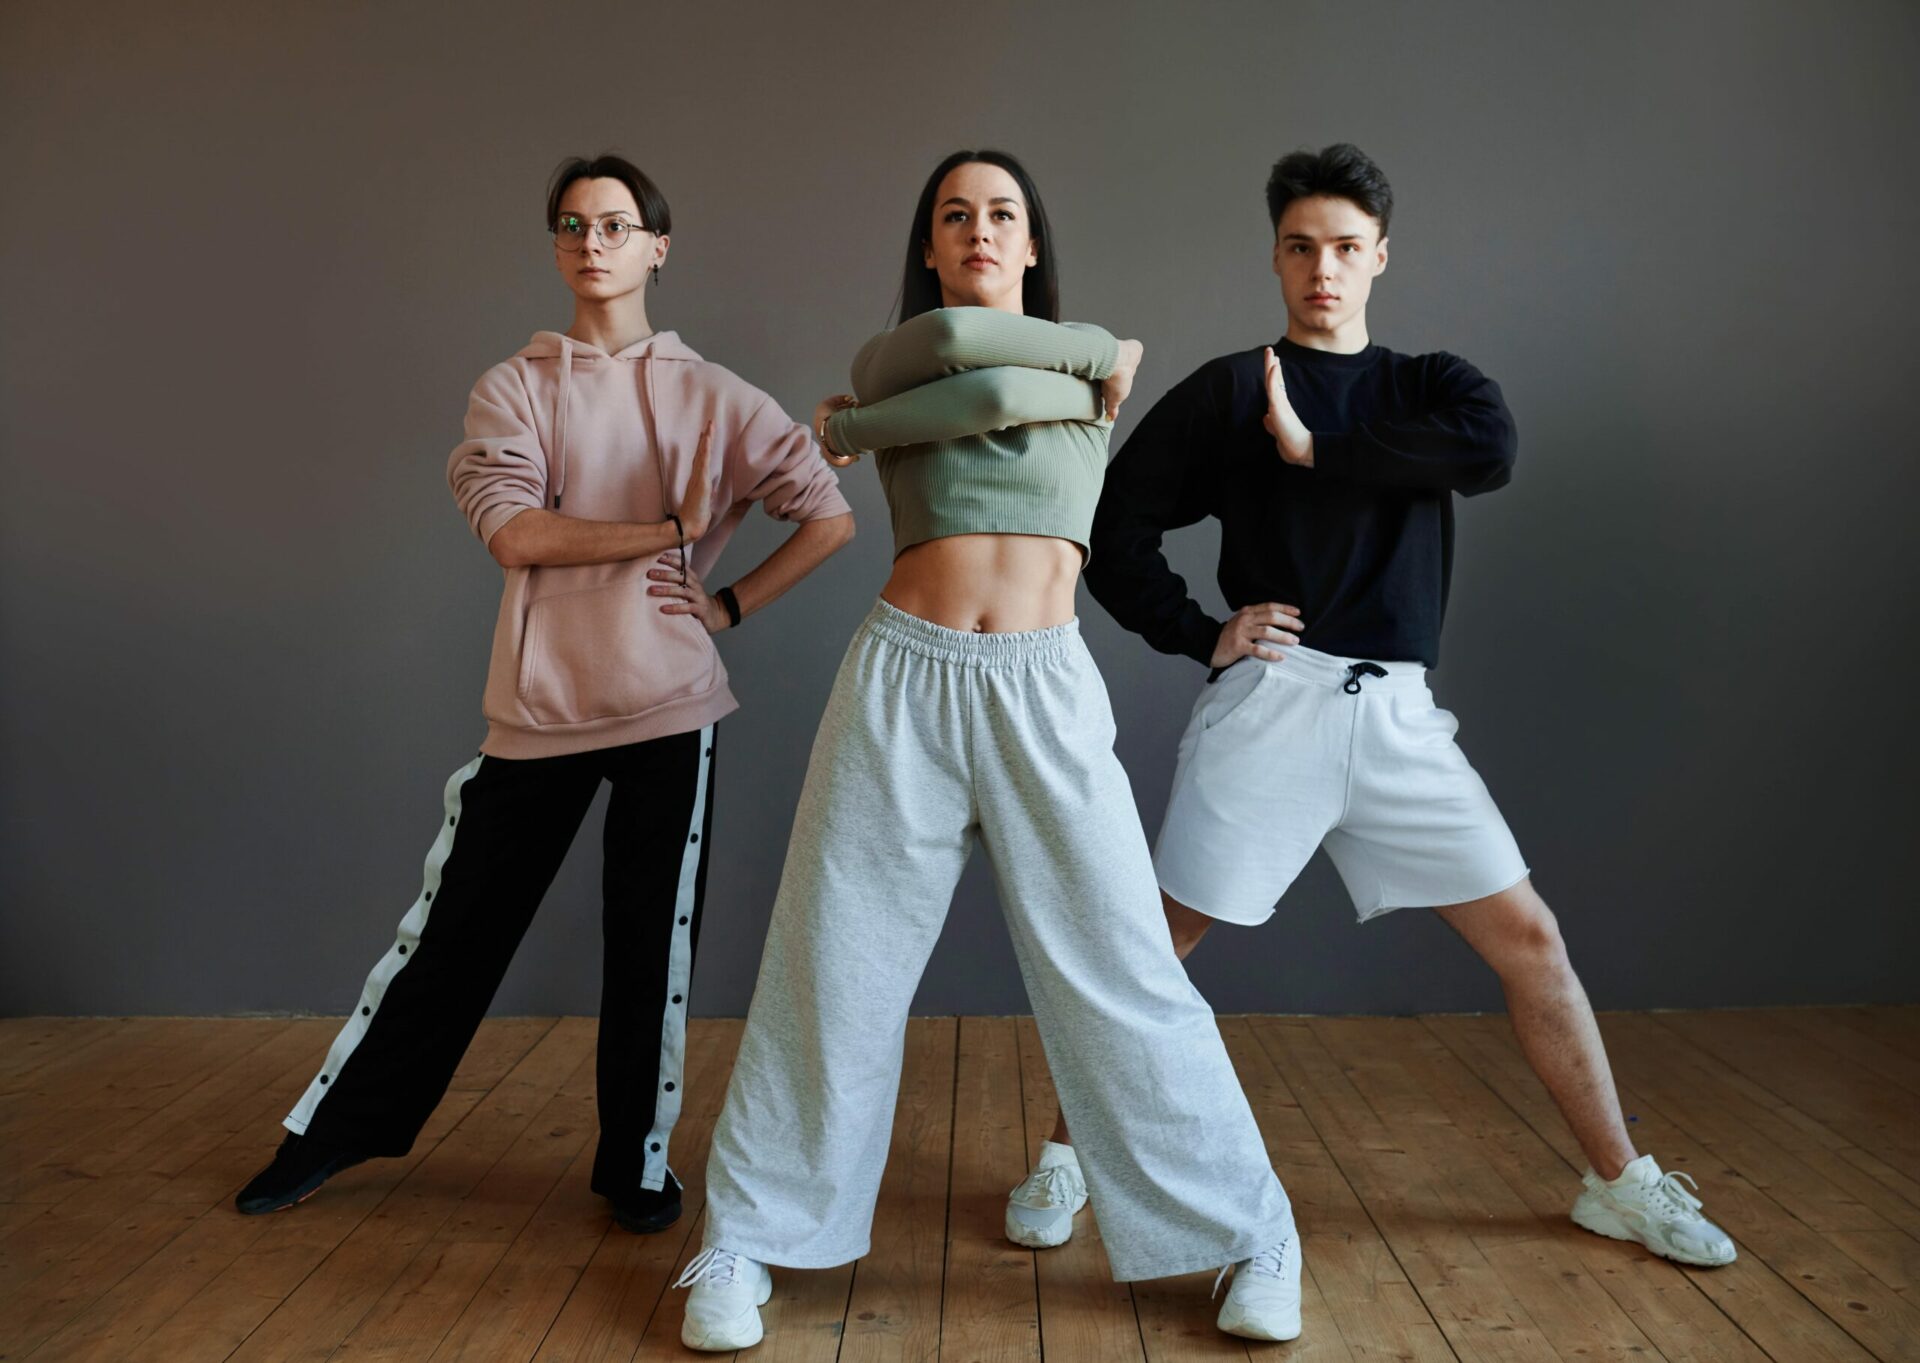 Three teens taking part in a Toronto dance lesson for teens